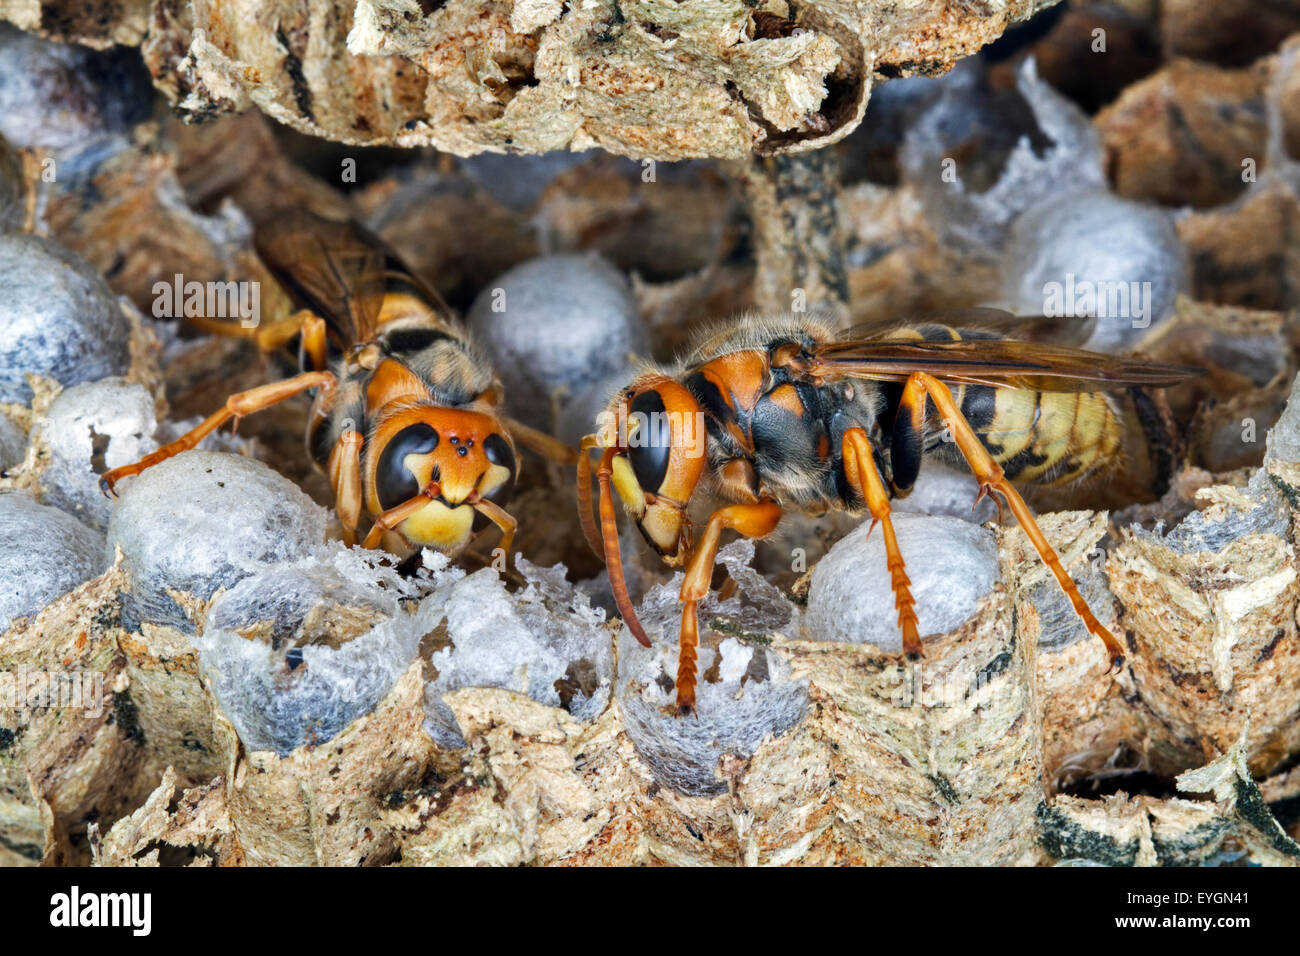 Two European hornets (Vespa crabro) on brood cells in paper nest Stock Photo